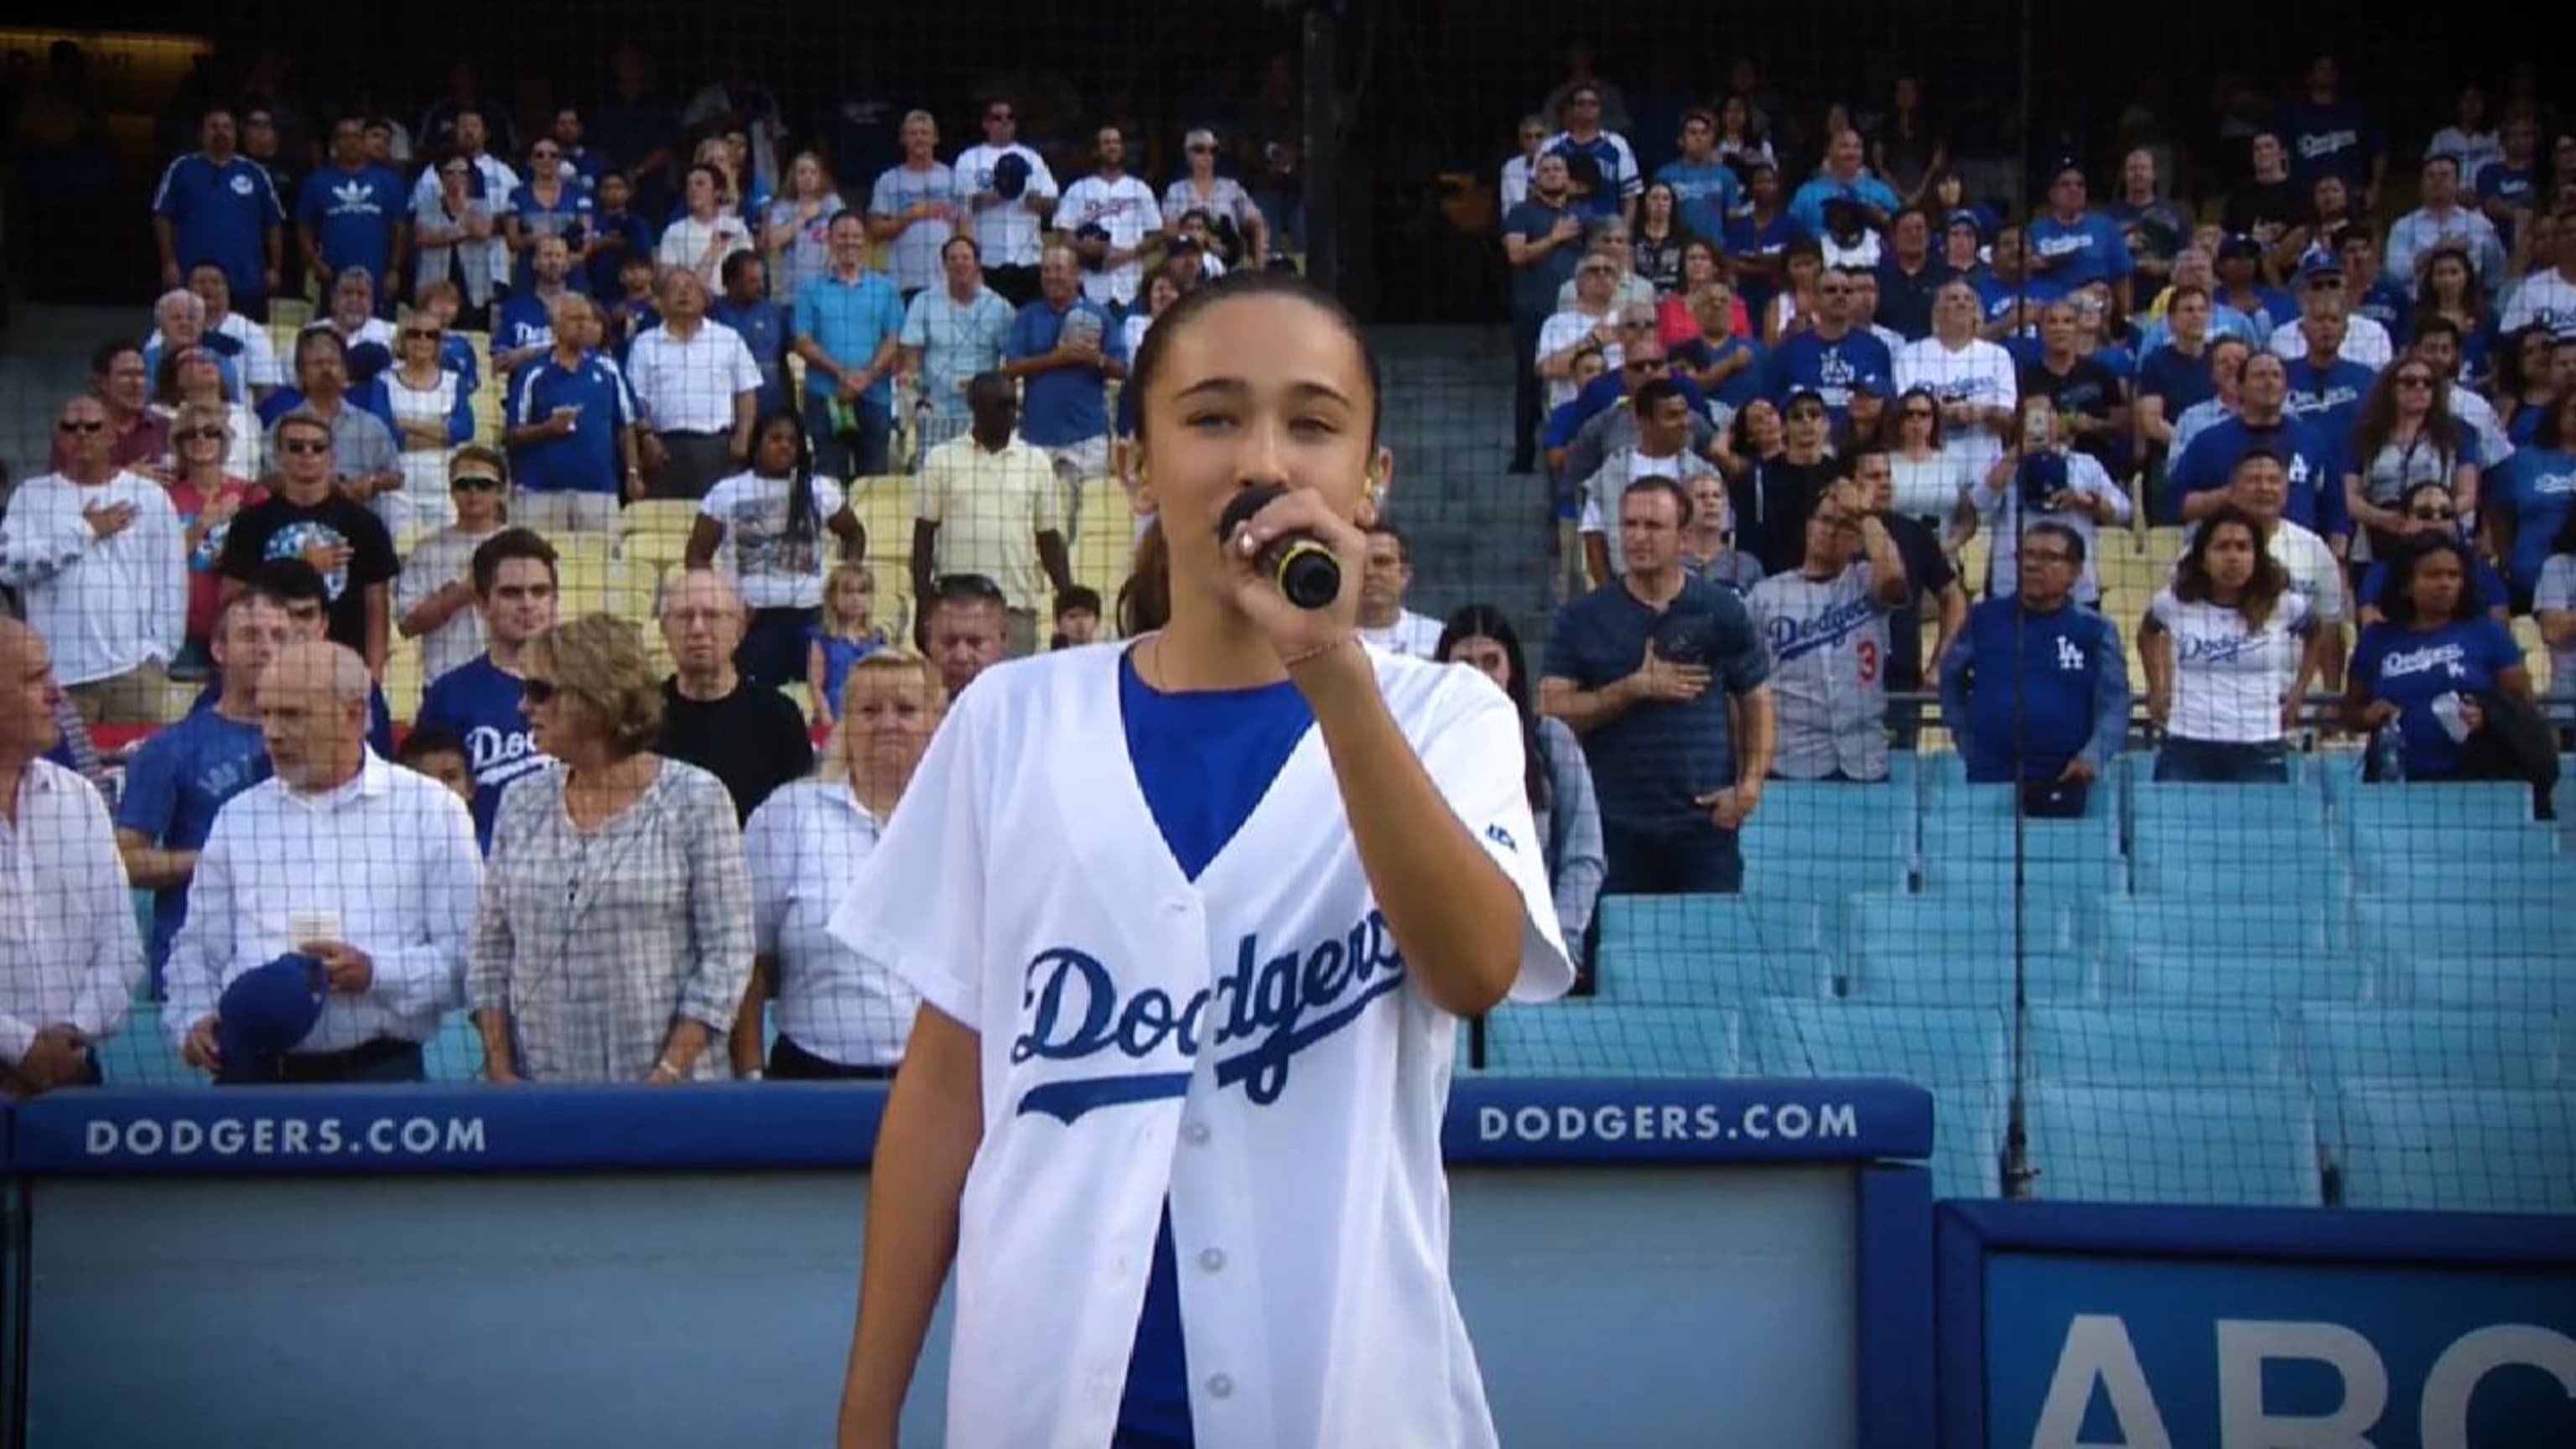 Dave Roberts' bobblehead night was a family affair with his daughter  singing the national anthem